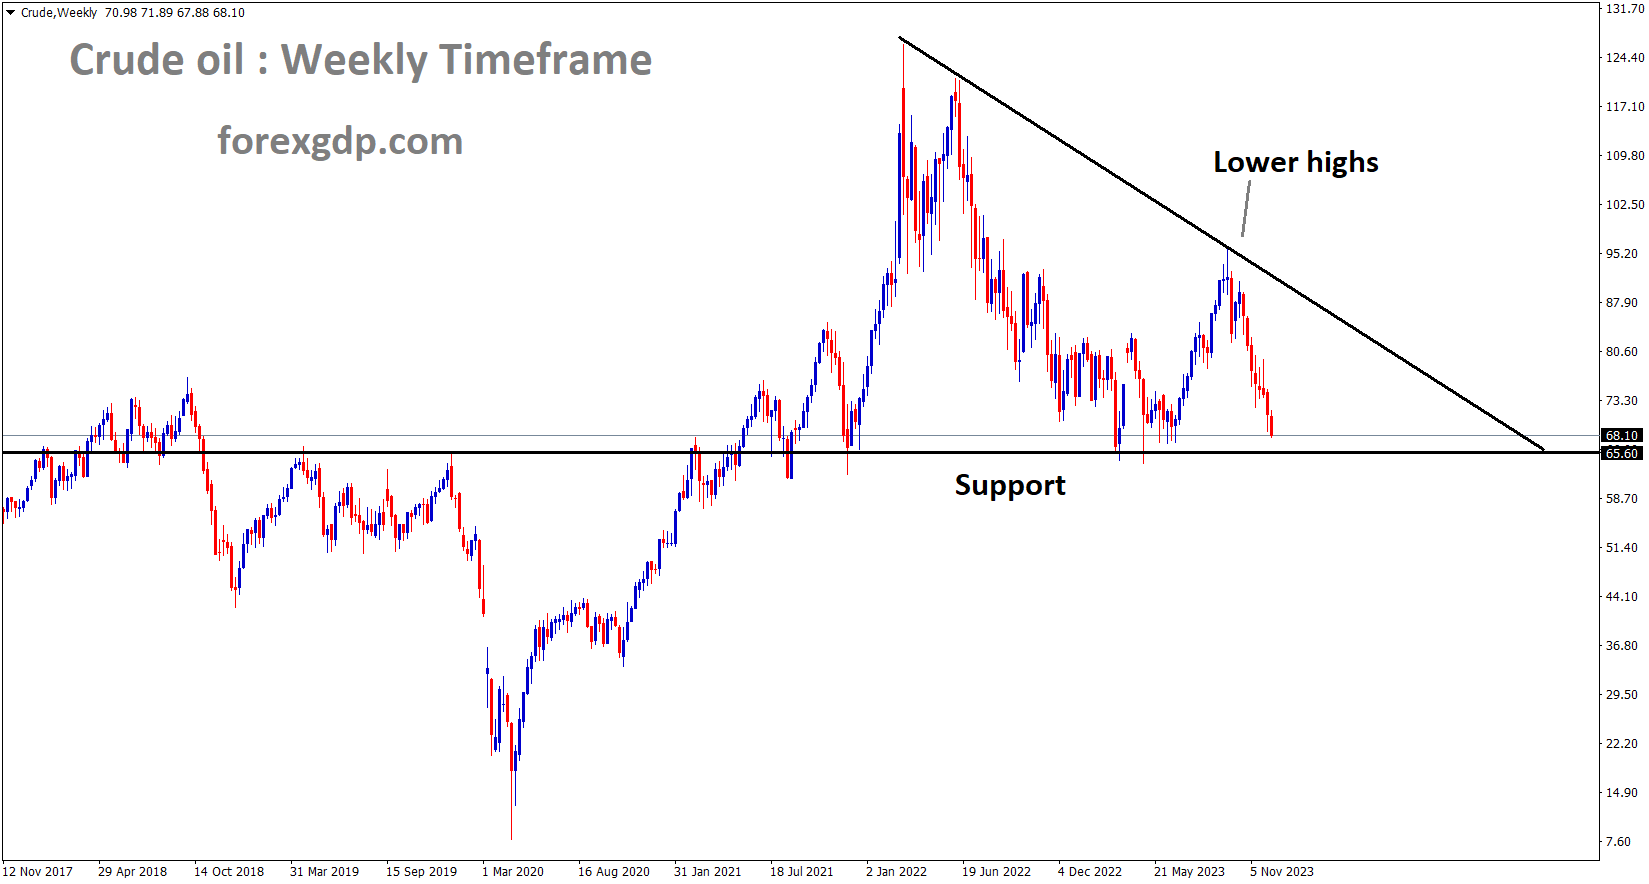 Crude Oil is moving in the Descending triangle pattern and the market has reached the support area of the pattern